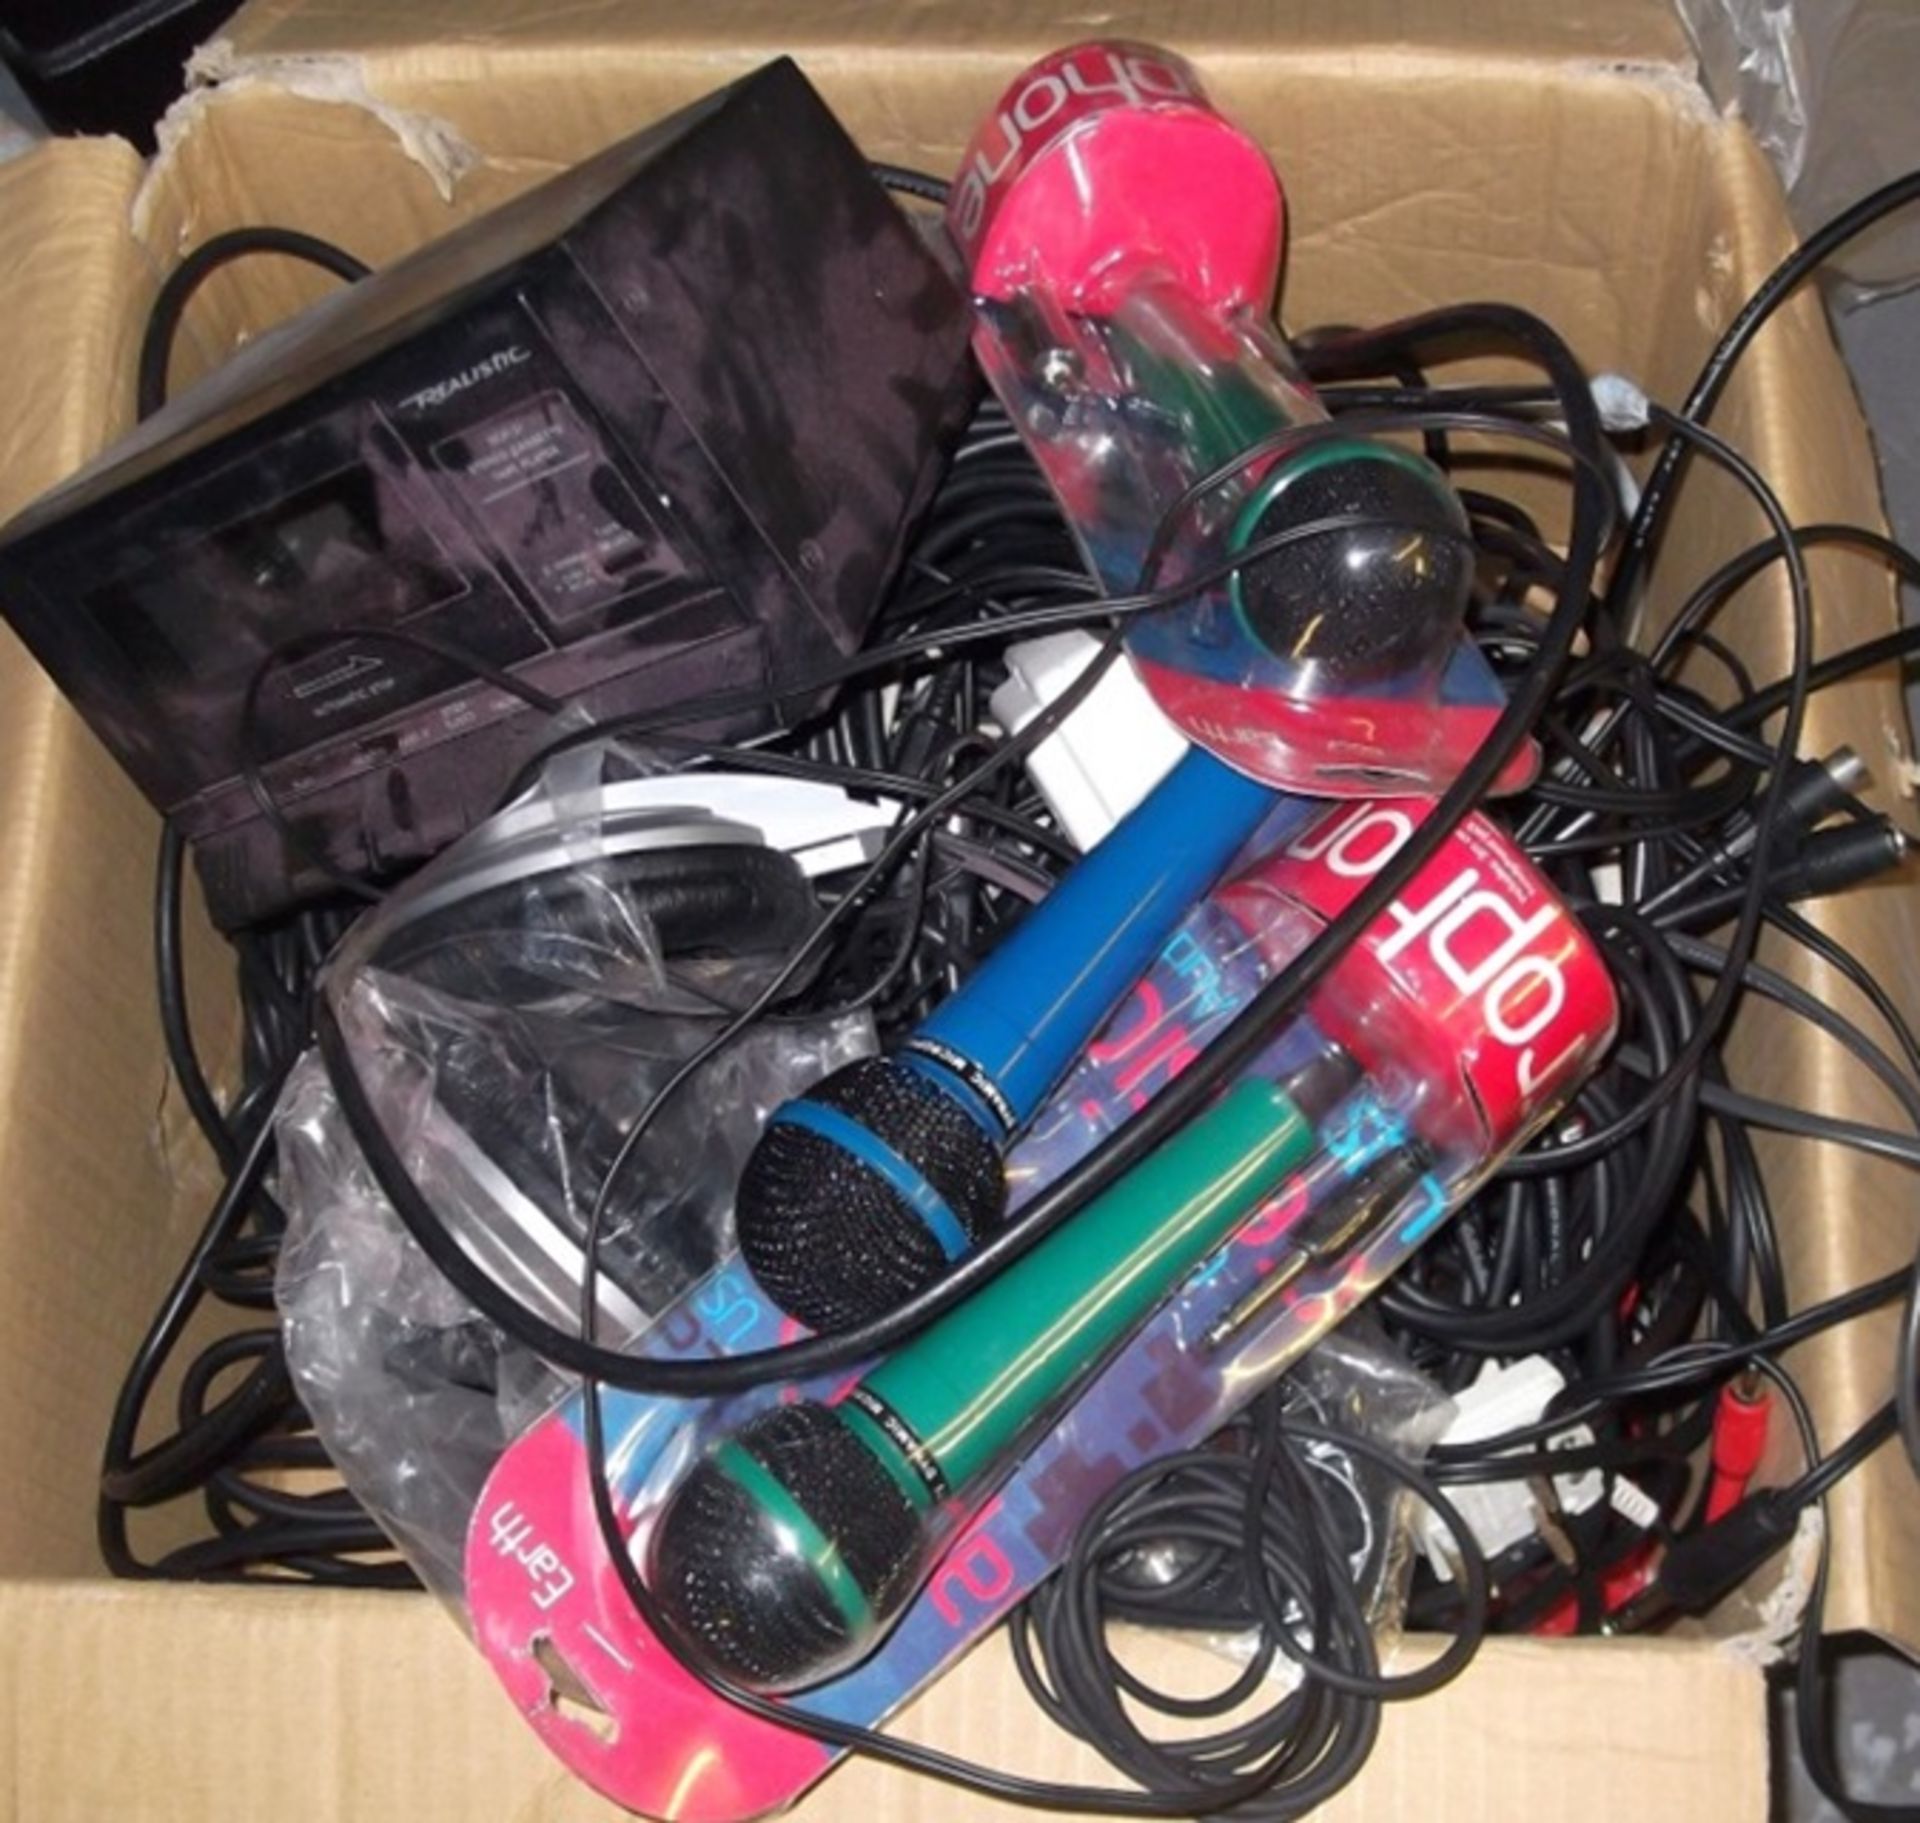 1 x Box Of Assorted Sound Equipment - Includes Professional Microphones, Tape Deck, Mixed Audio